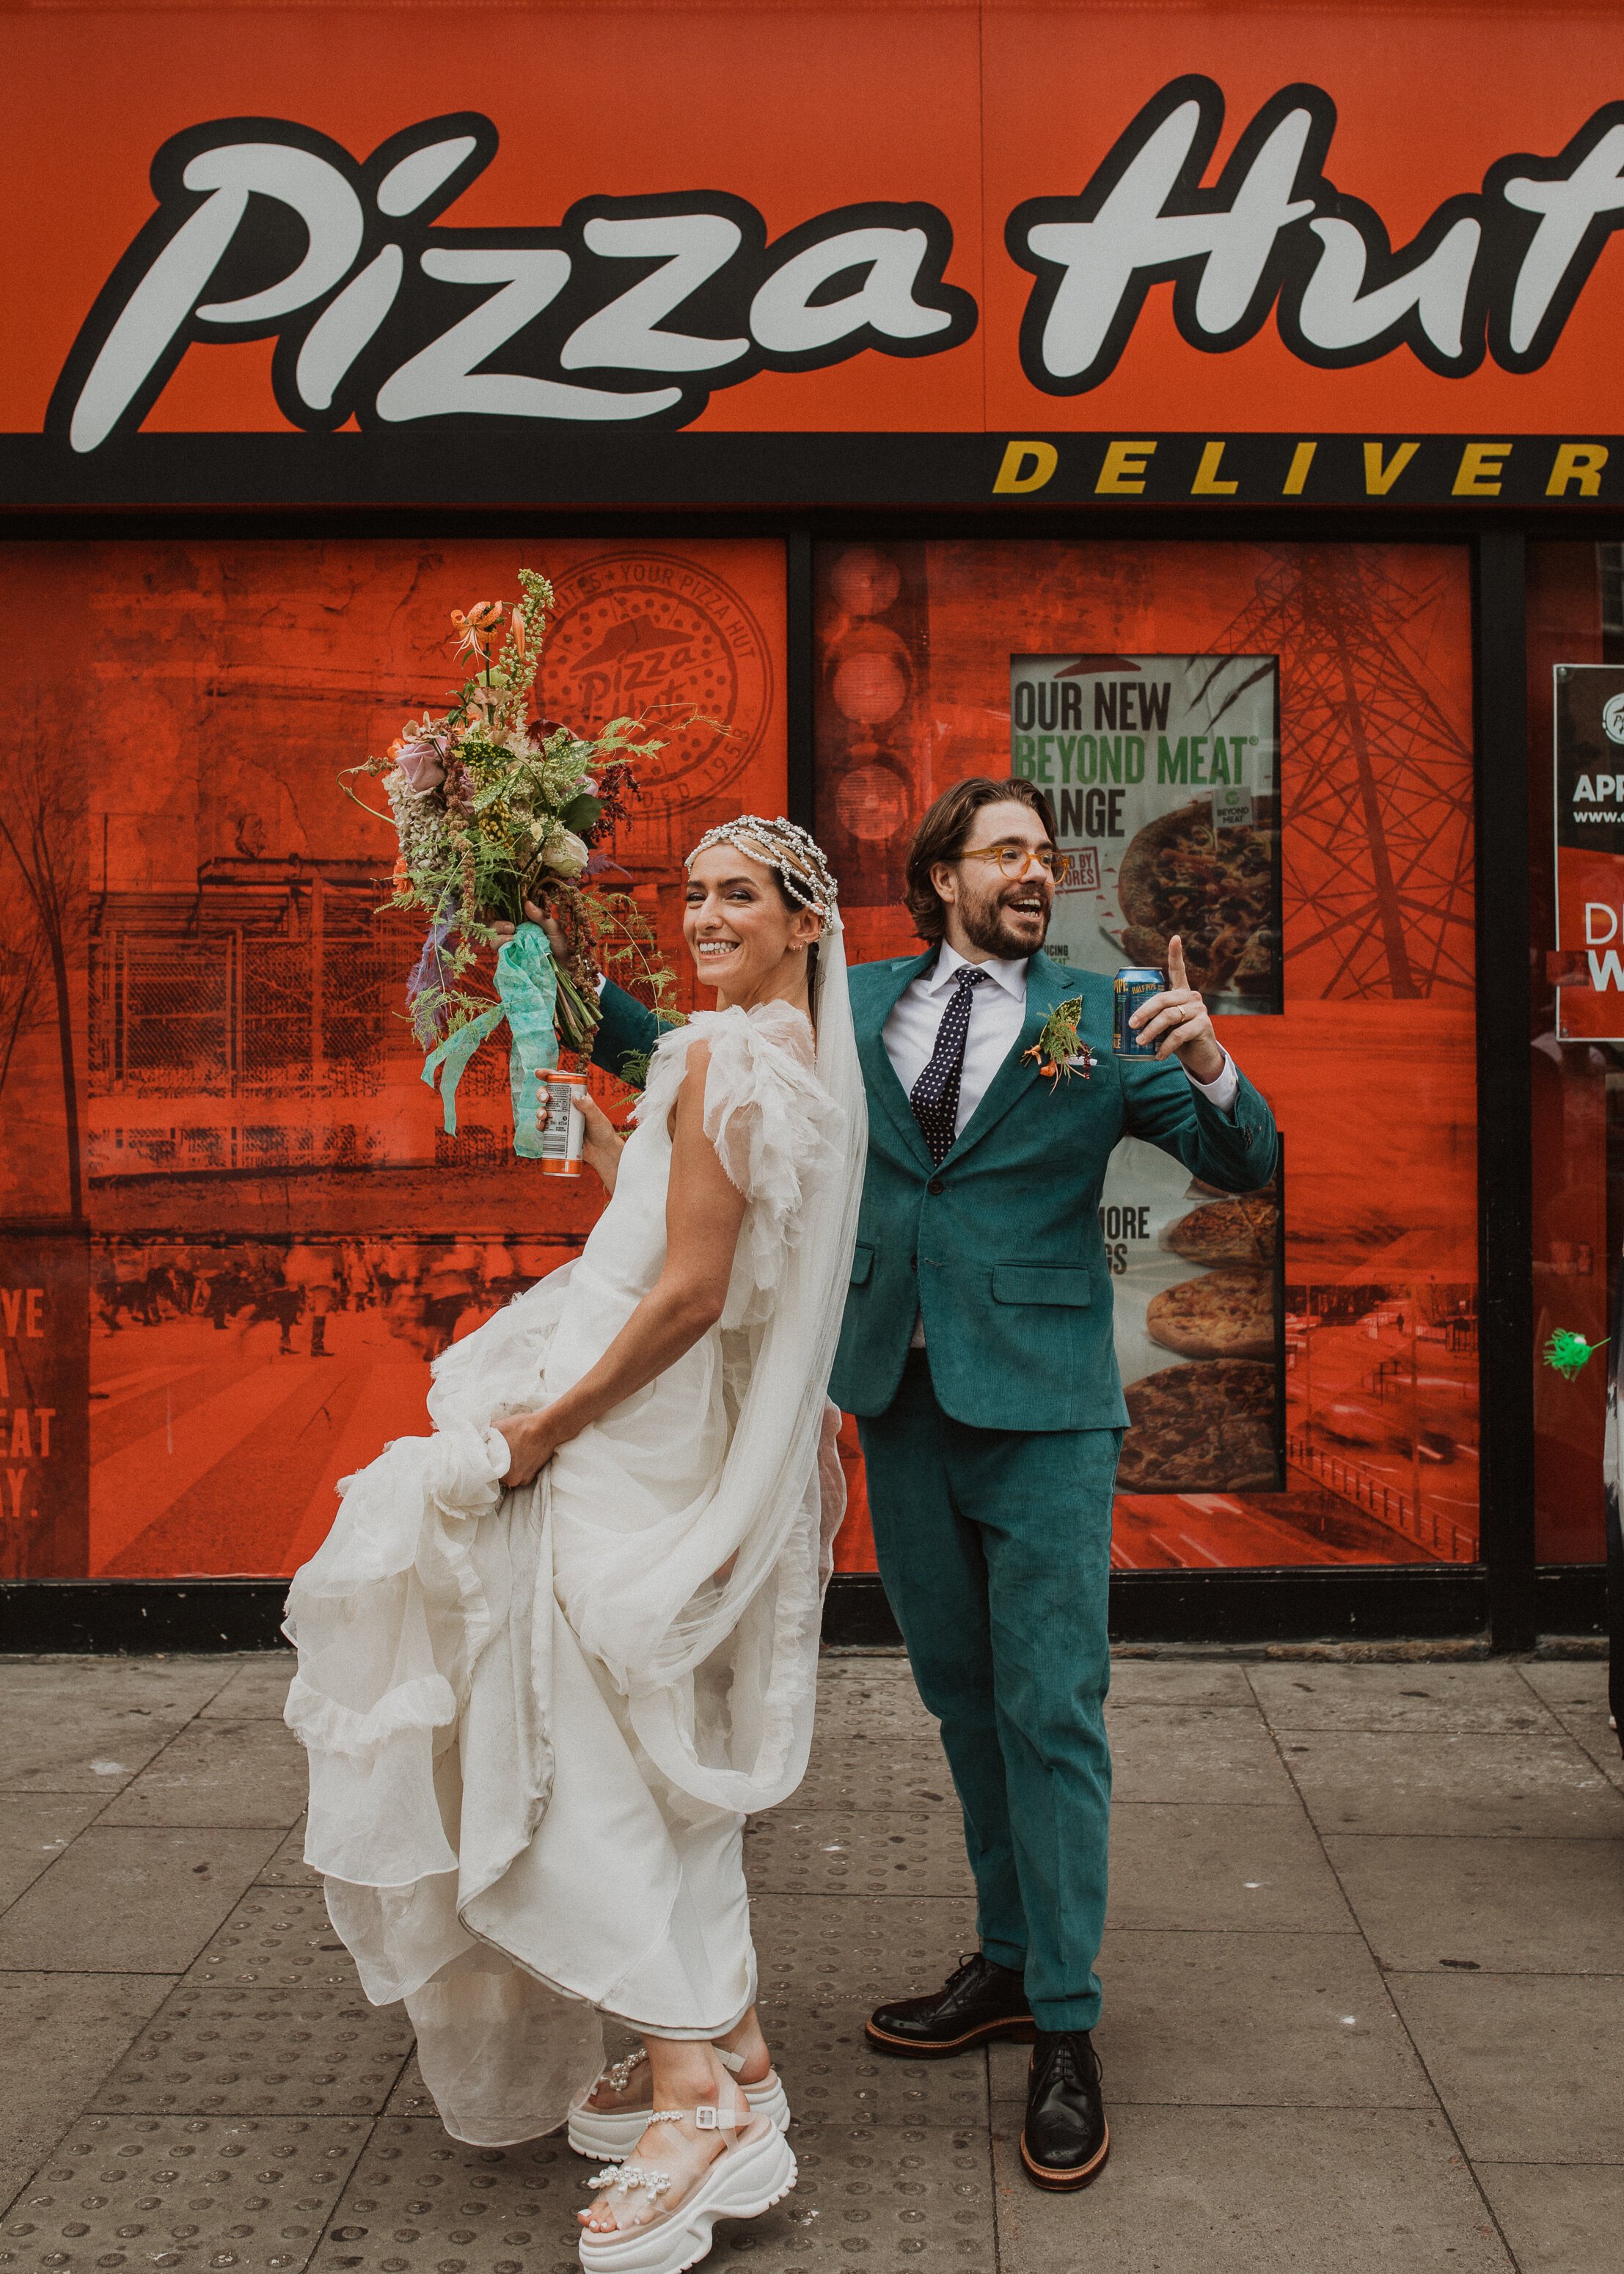 Beautiful bride Laura wore the Mayfair dress by Halfpenny London on her wedding day